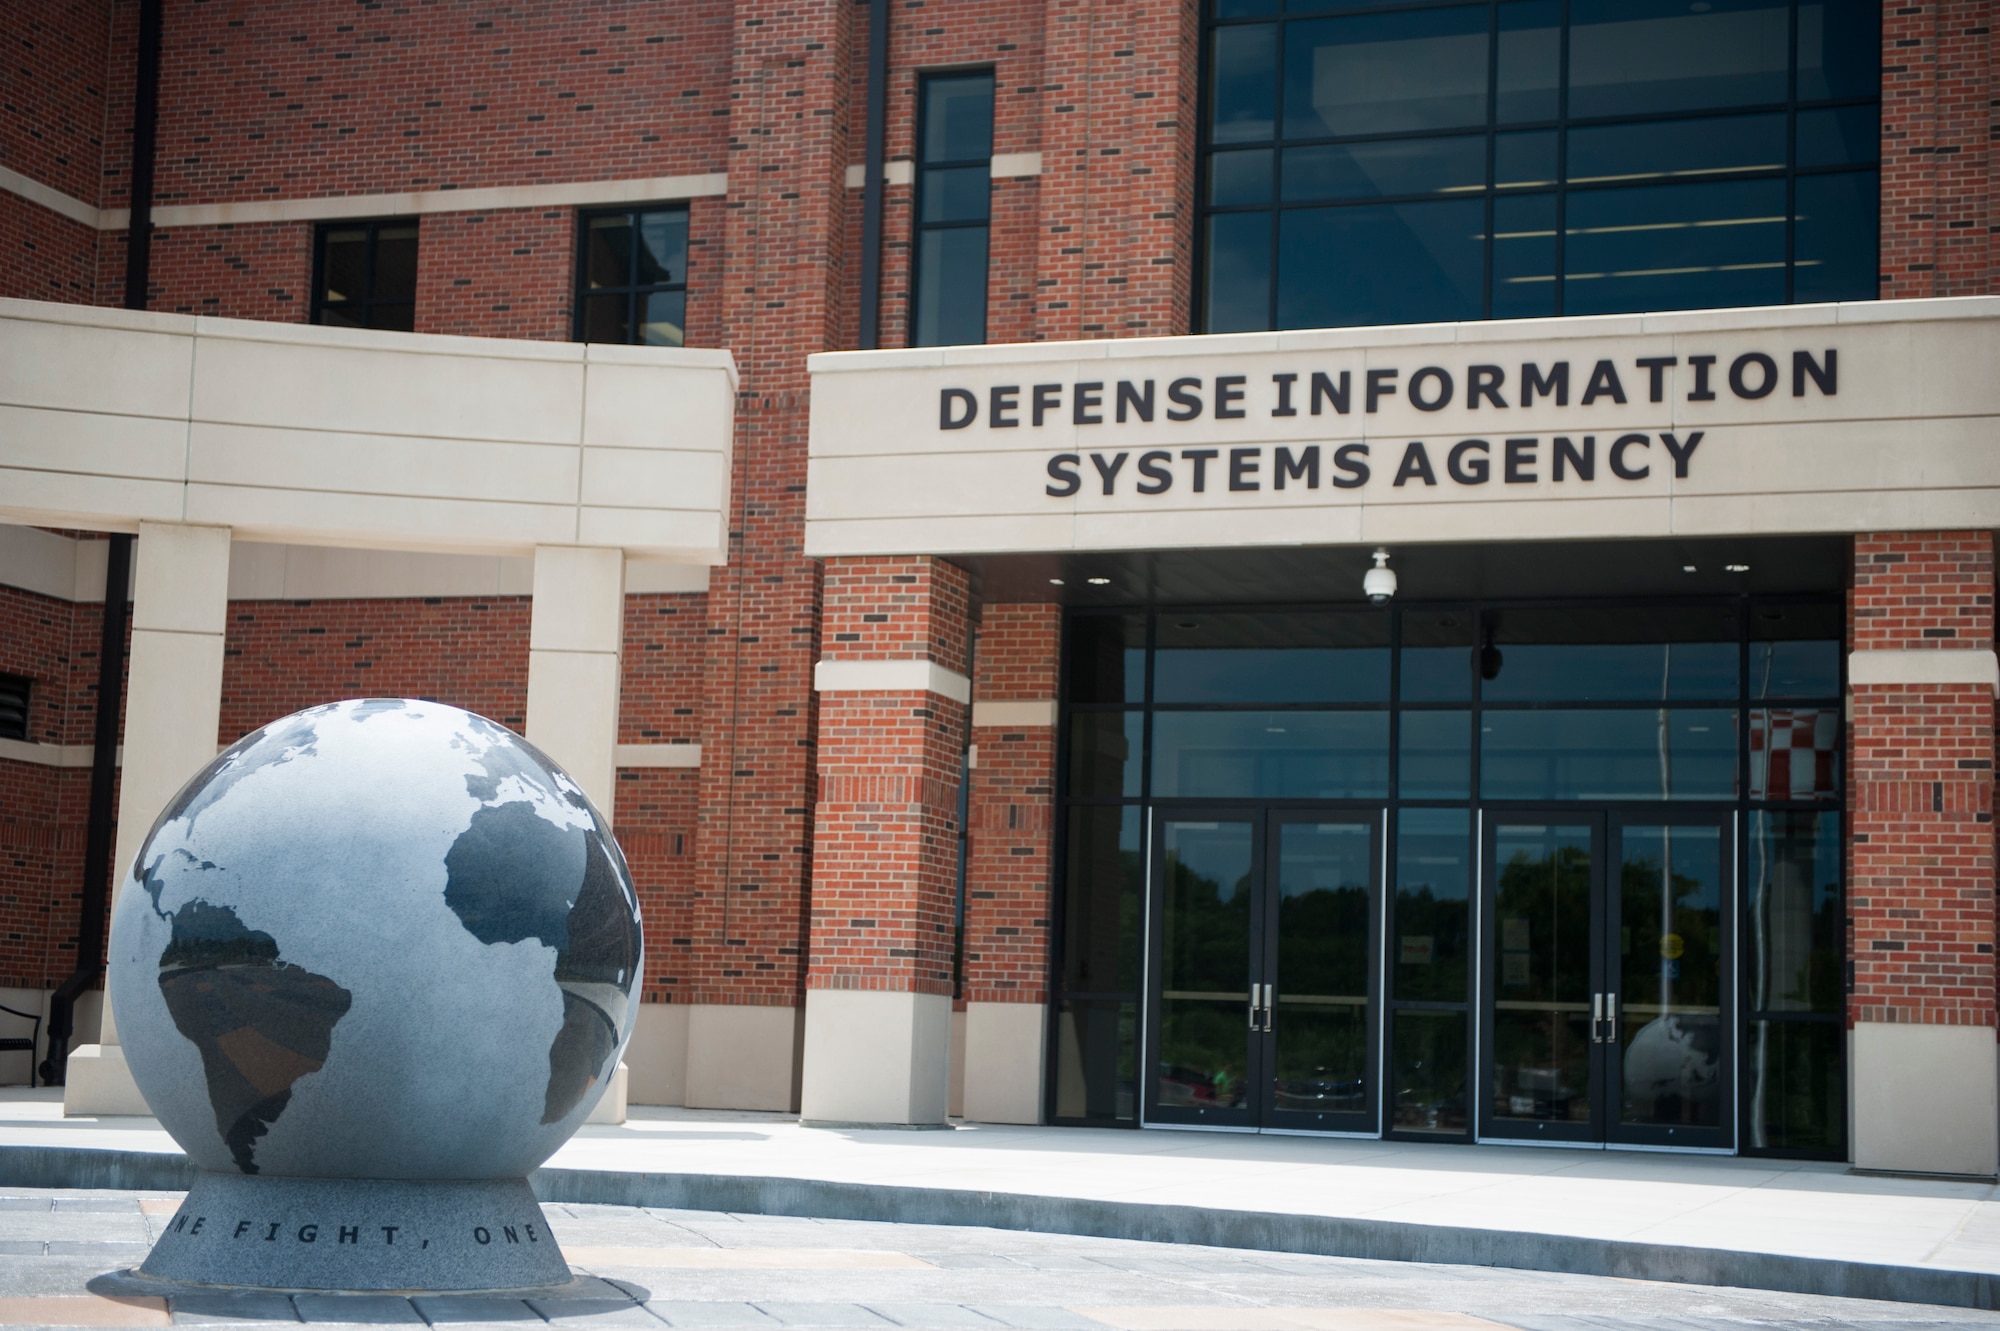 The Defense Information Systems Agency is a combat support agency of the Department of Defense and is composed of nearly 6,000 civilian employees; more than 1,500 active duty service members; and approximately 7,500 defense contractors. DISA provides, operates, and assures command and control and information-sharing capabilities in direct support to joint warfighters, national level leaders, and other mission and coalition partners. (U.S. Air Force photo by Staff Sgt. Clayton Lenhardt/Released)